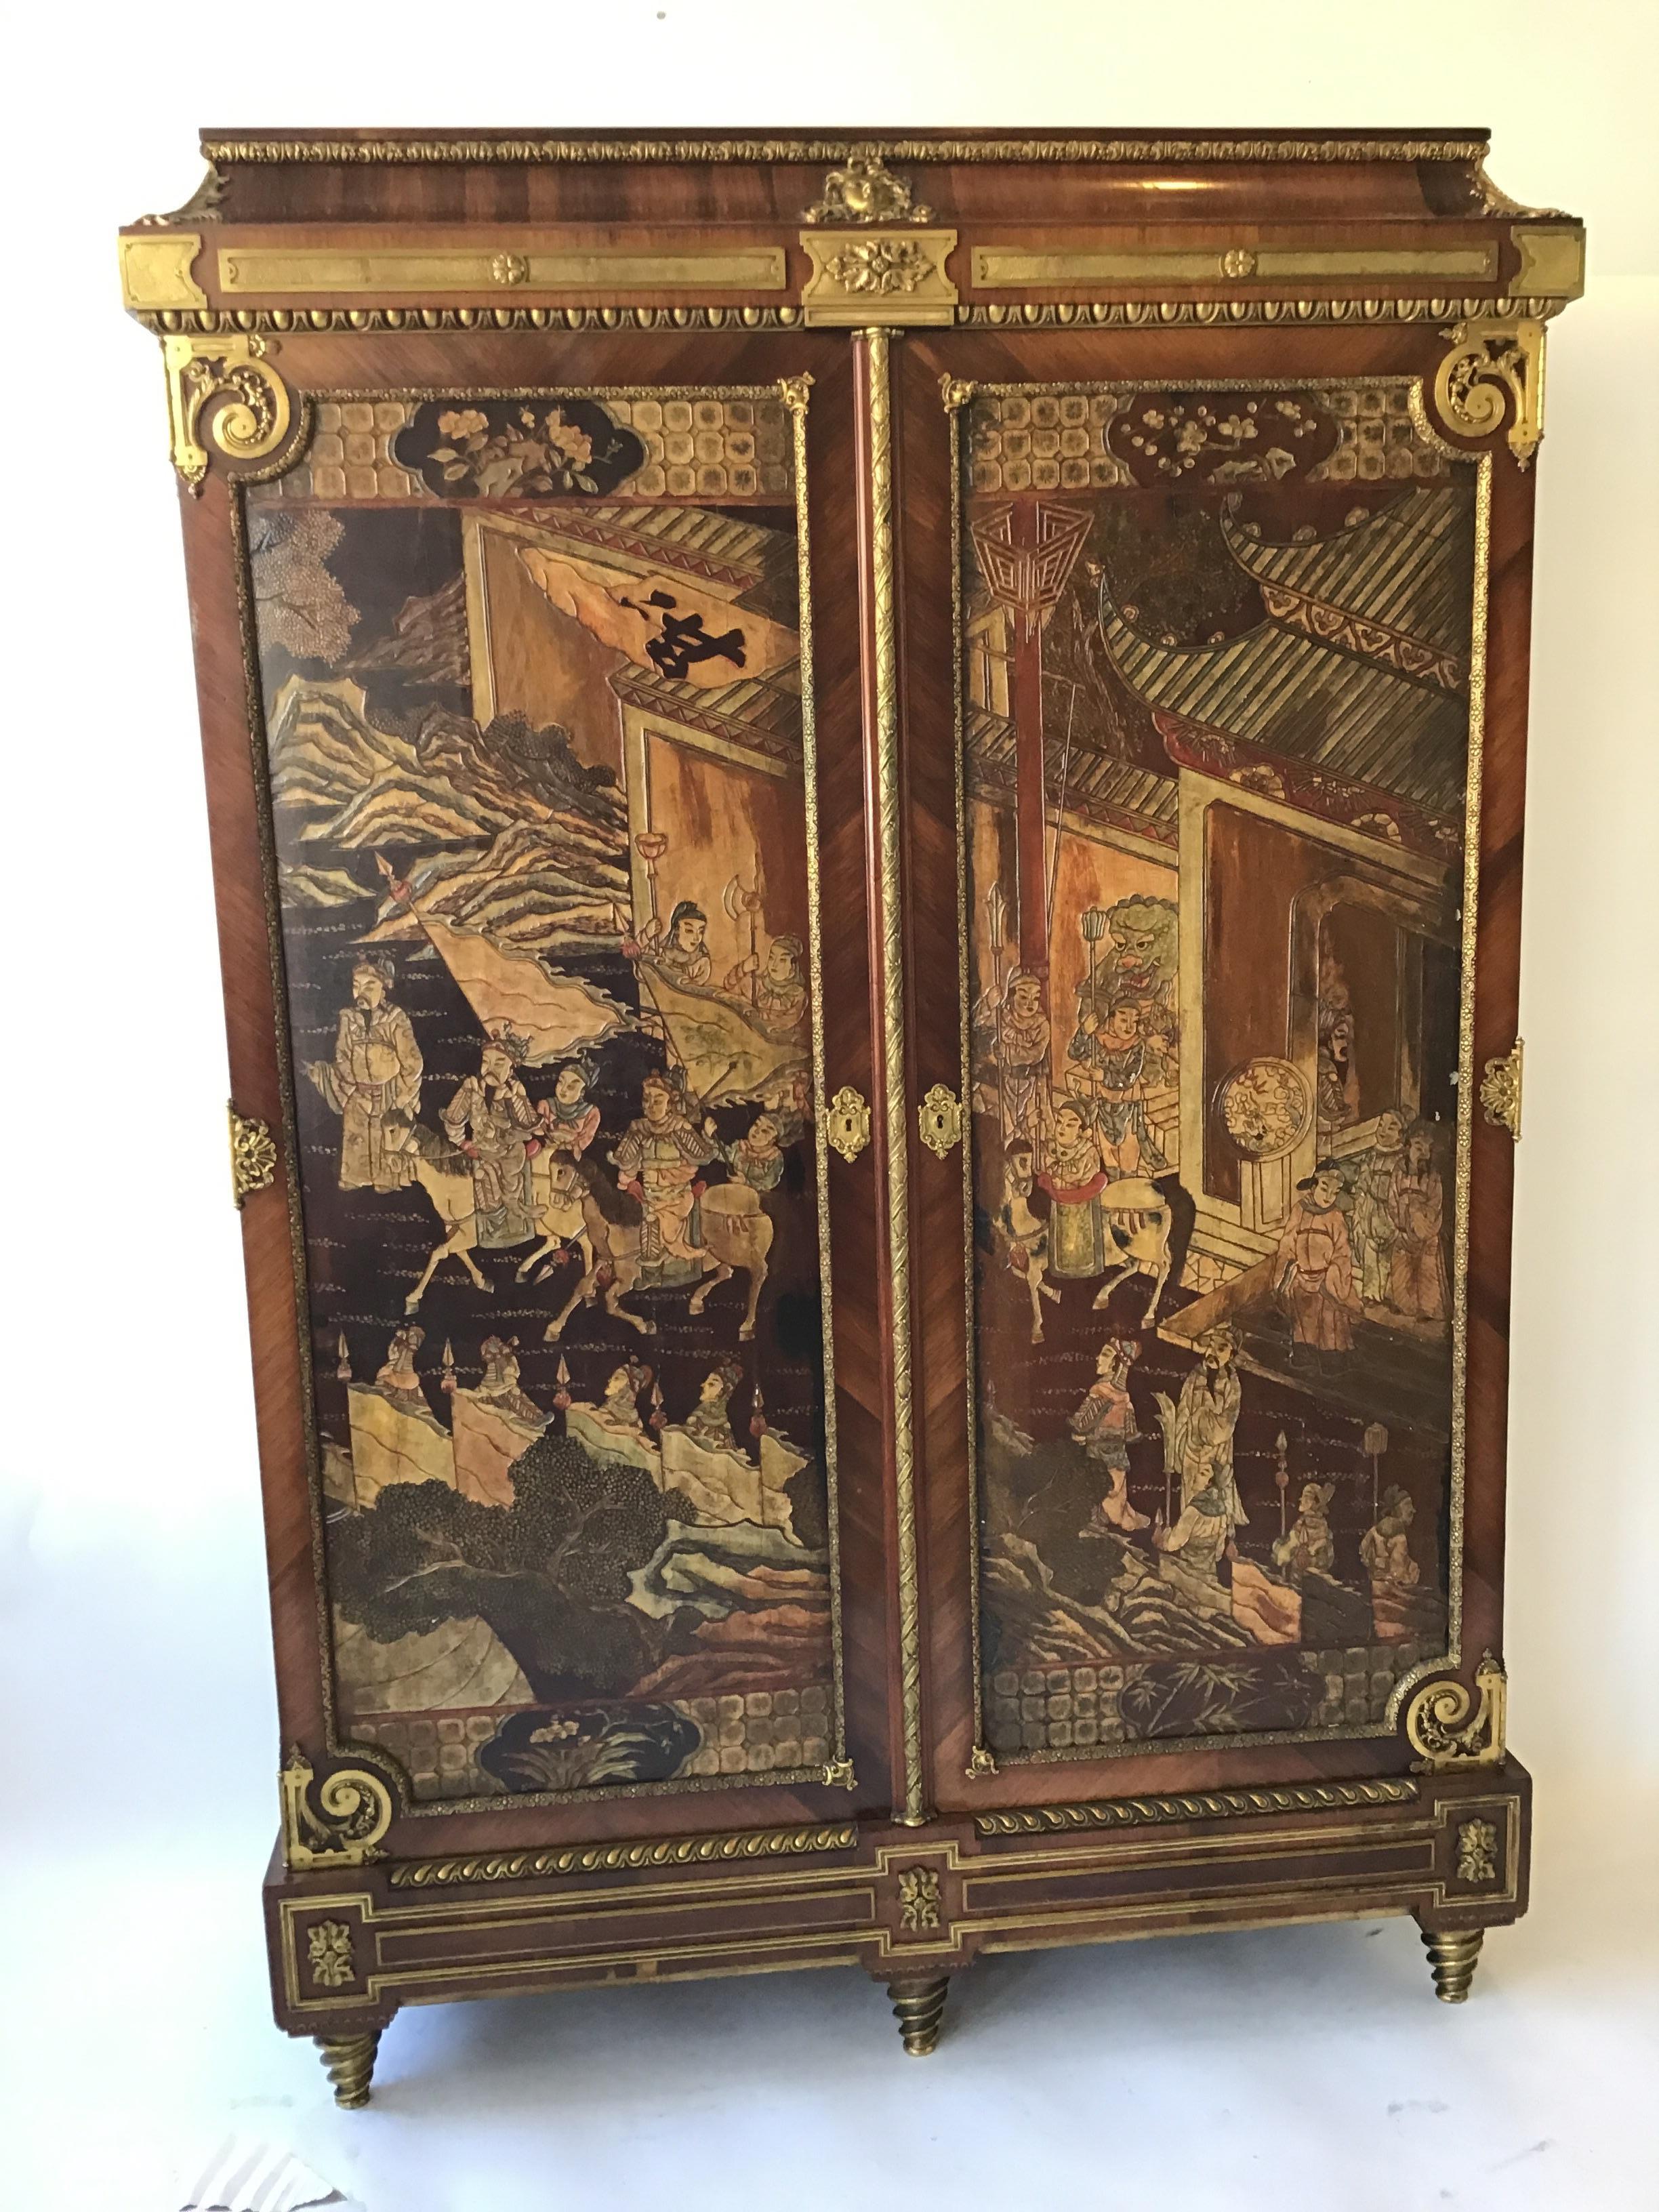 A Louis XIV ormolu-mounted kingwood and coromandel lacquered armoire by Francois Linke, circa 1900, Made in Paris. The rectangular top above a spreading pediment applied to the center with an Apollo mask, above a frieze applied with rectangular